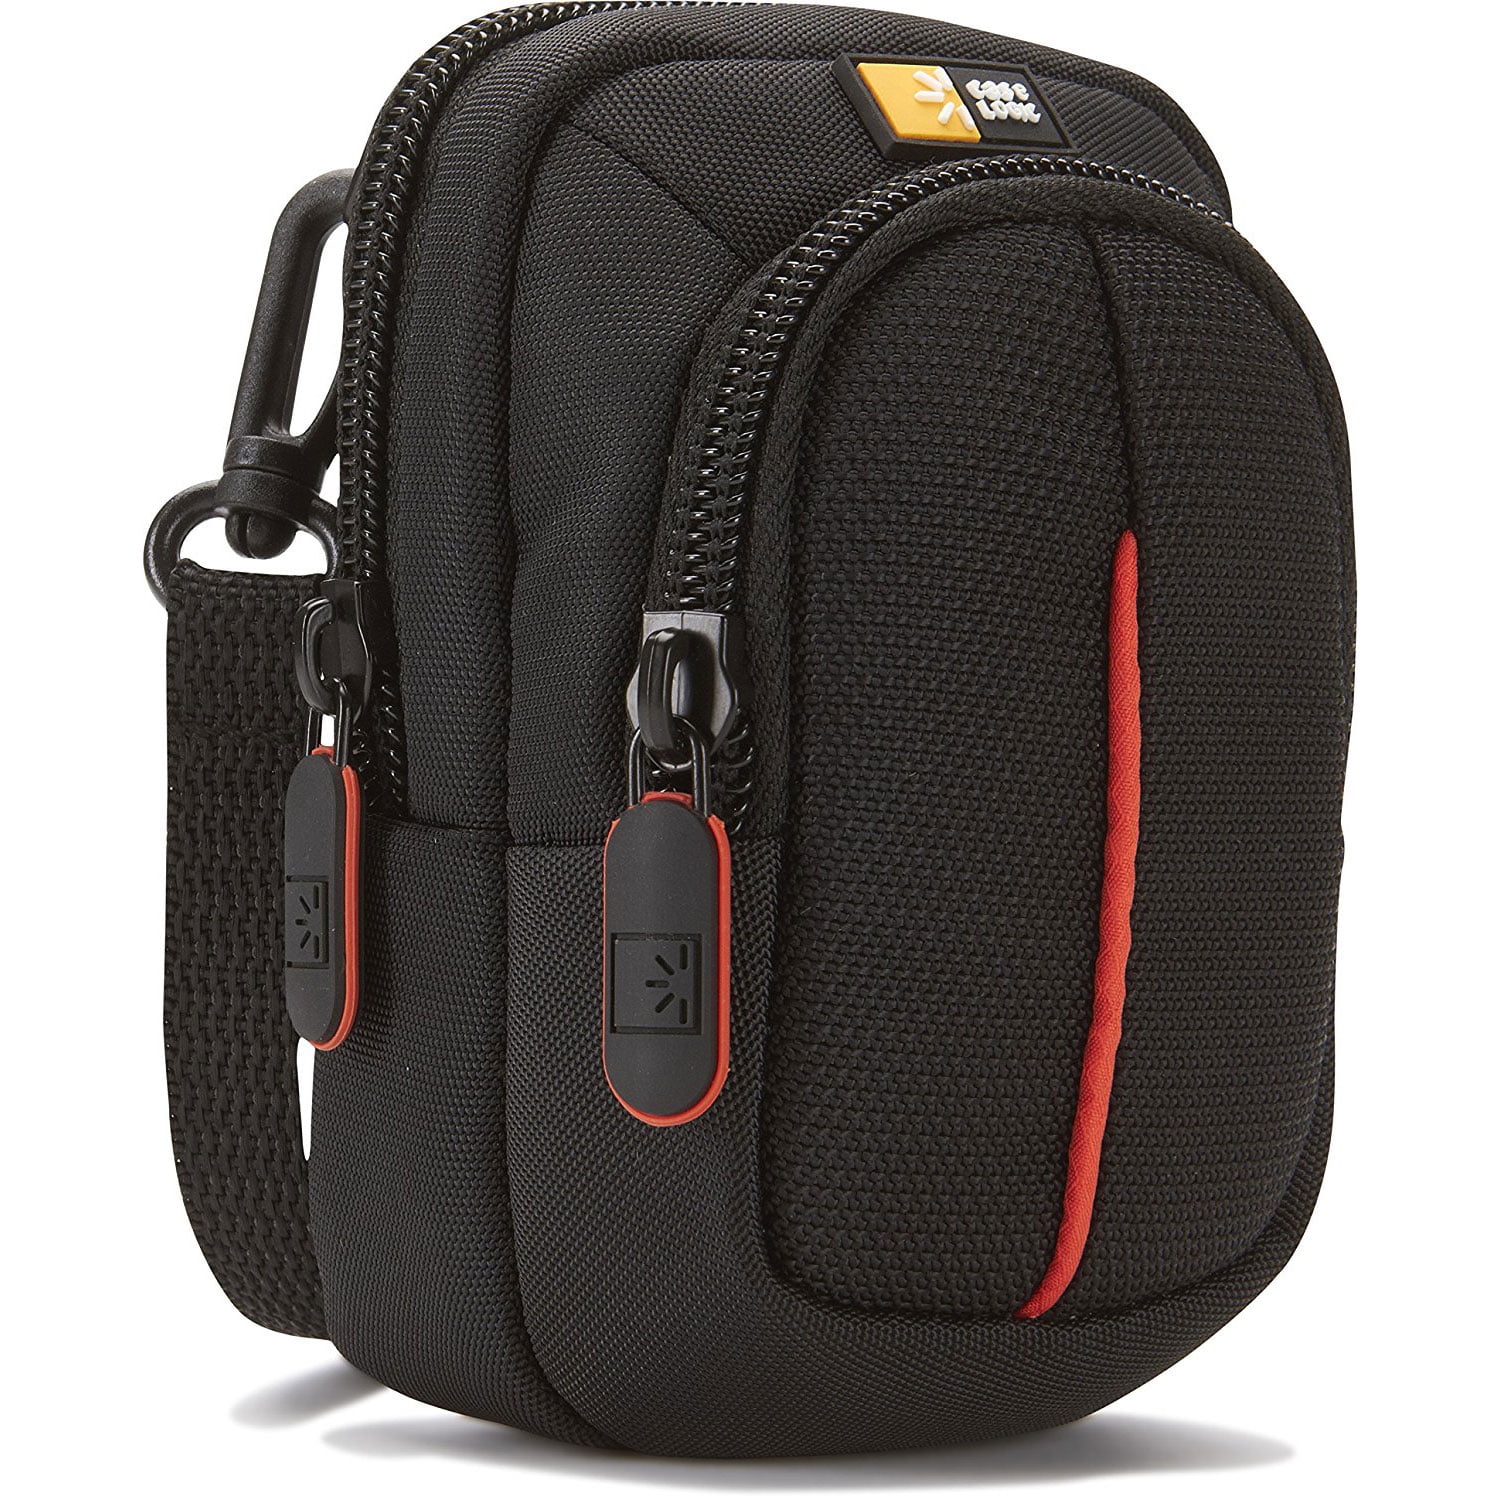 Case Logic DCB-302 Black Compact Camera Case with Storage 